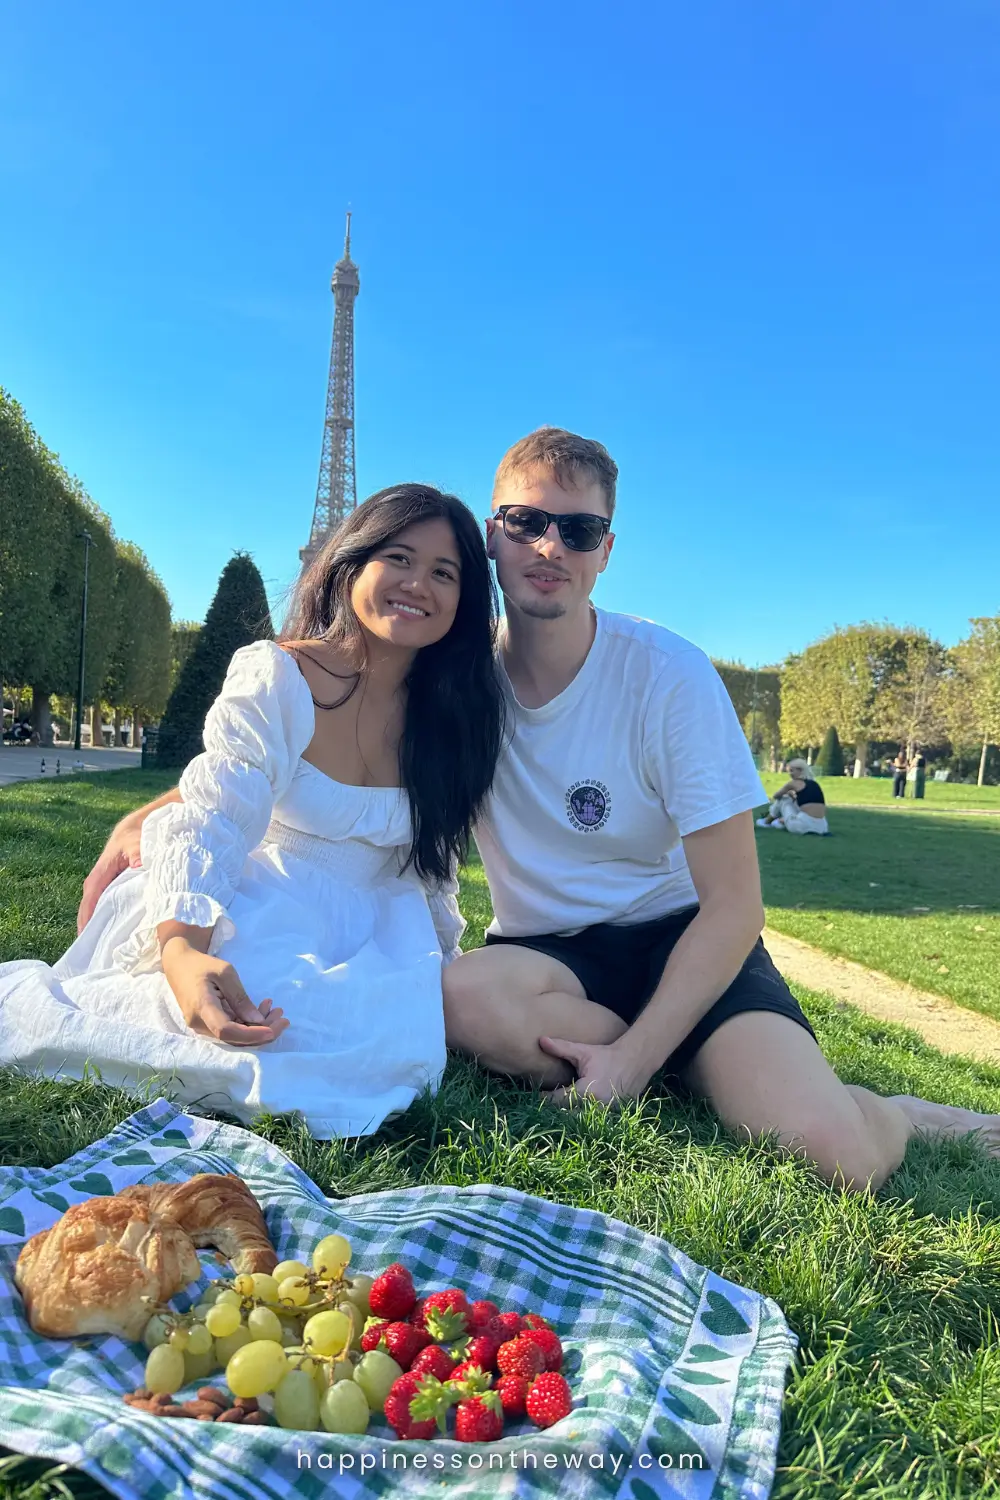 Me and Maton in a sunny picnic at the Eiffel Tower. In the foreground, a checkered cloth holds a croissant, grapes, and strawberries on grass.